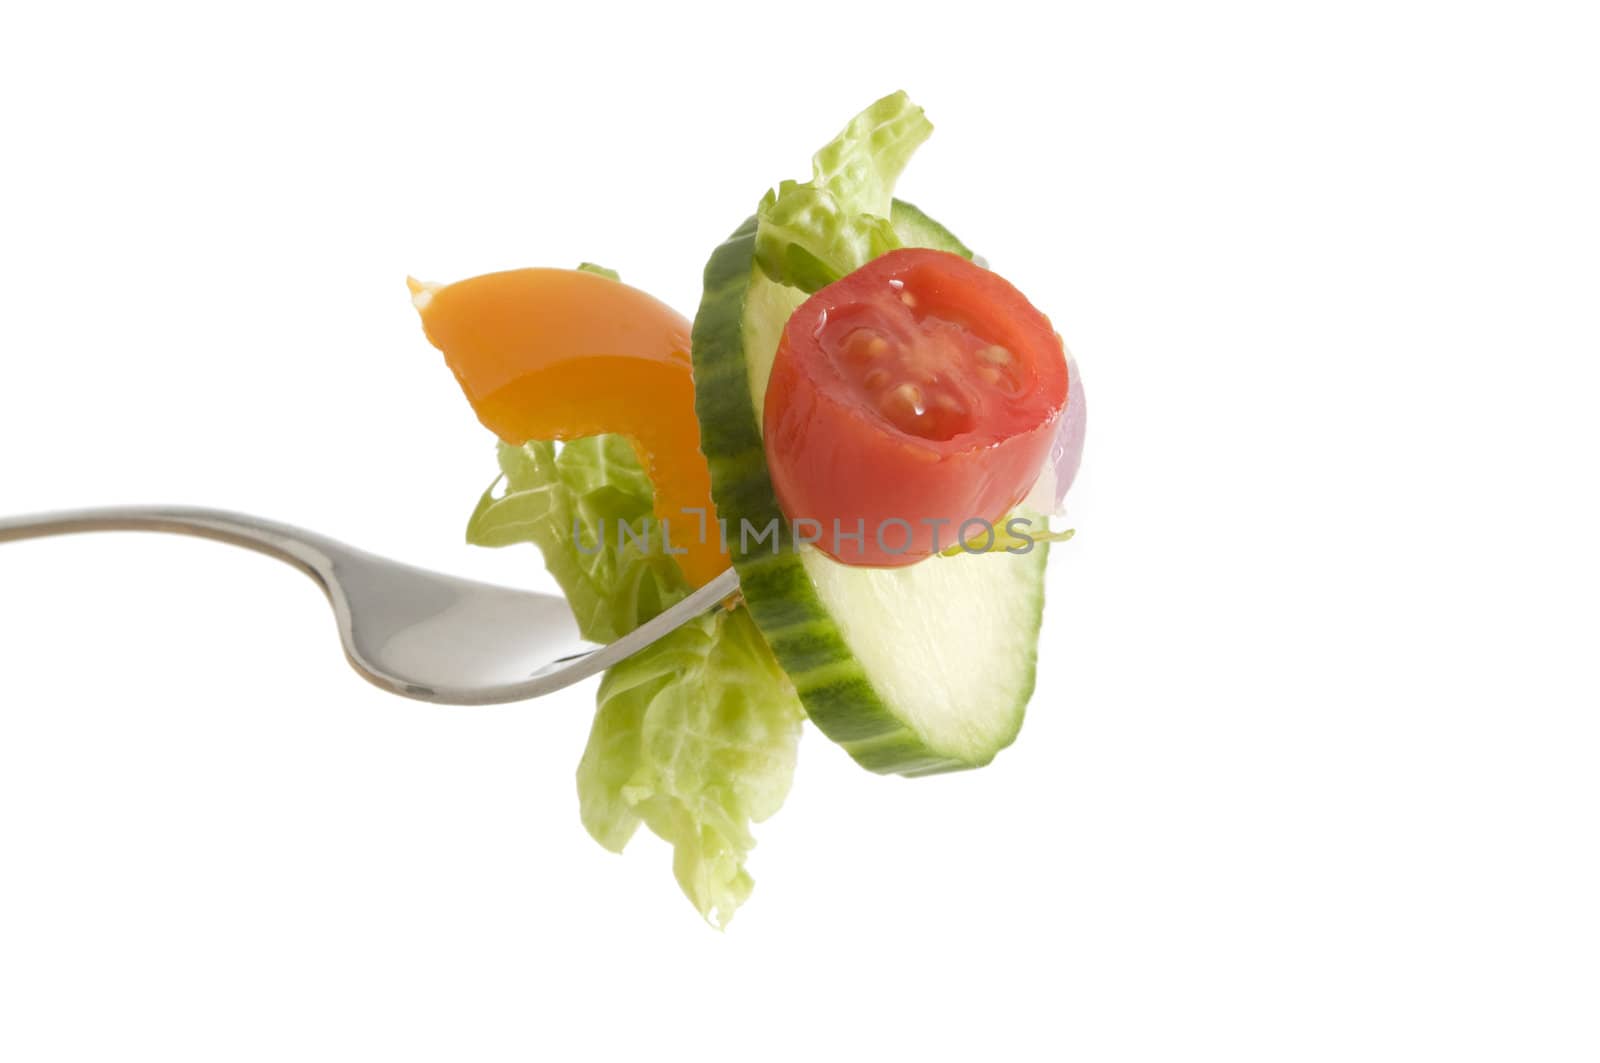 A fork full of salad including cucumber, tomatoe, pepper and lettuce, isolated on a white background